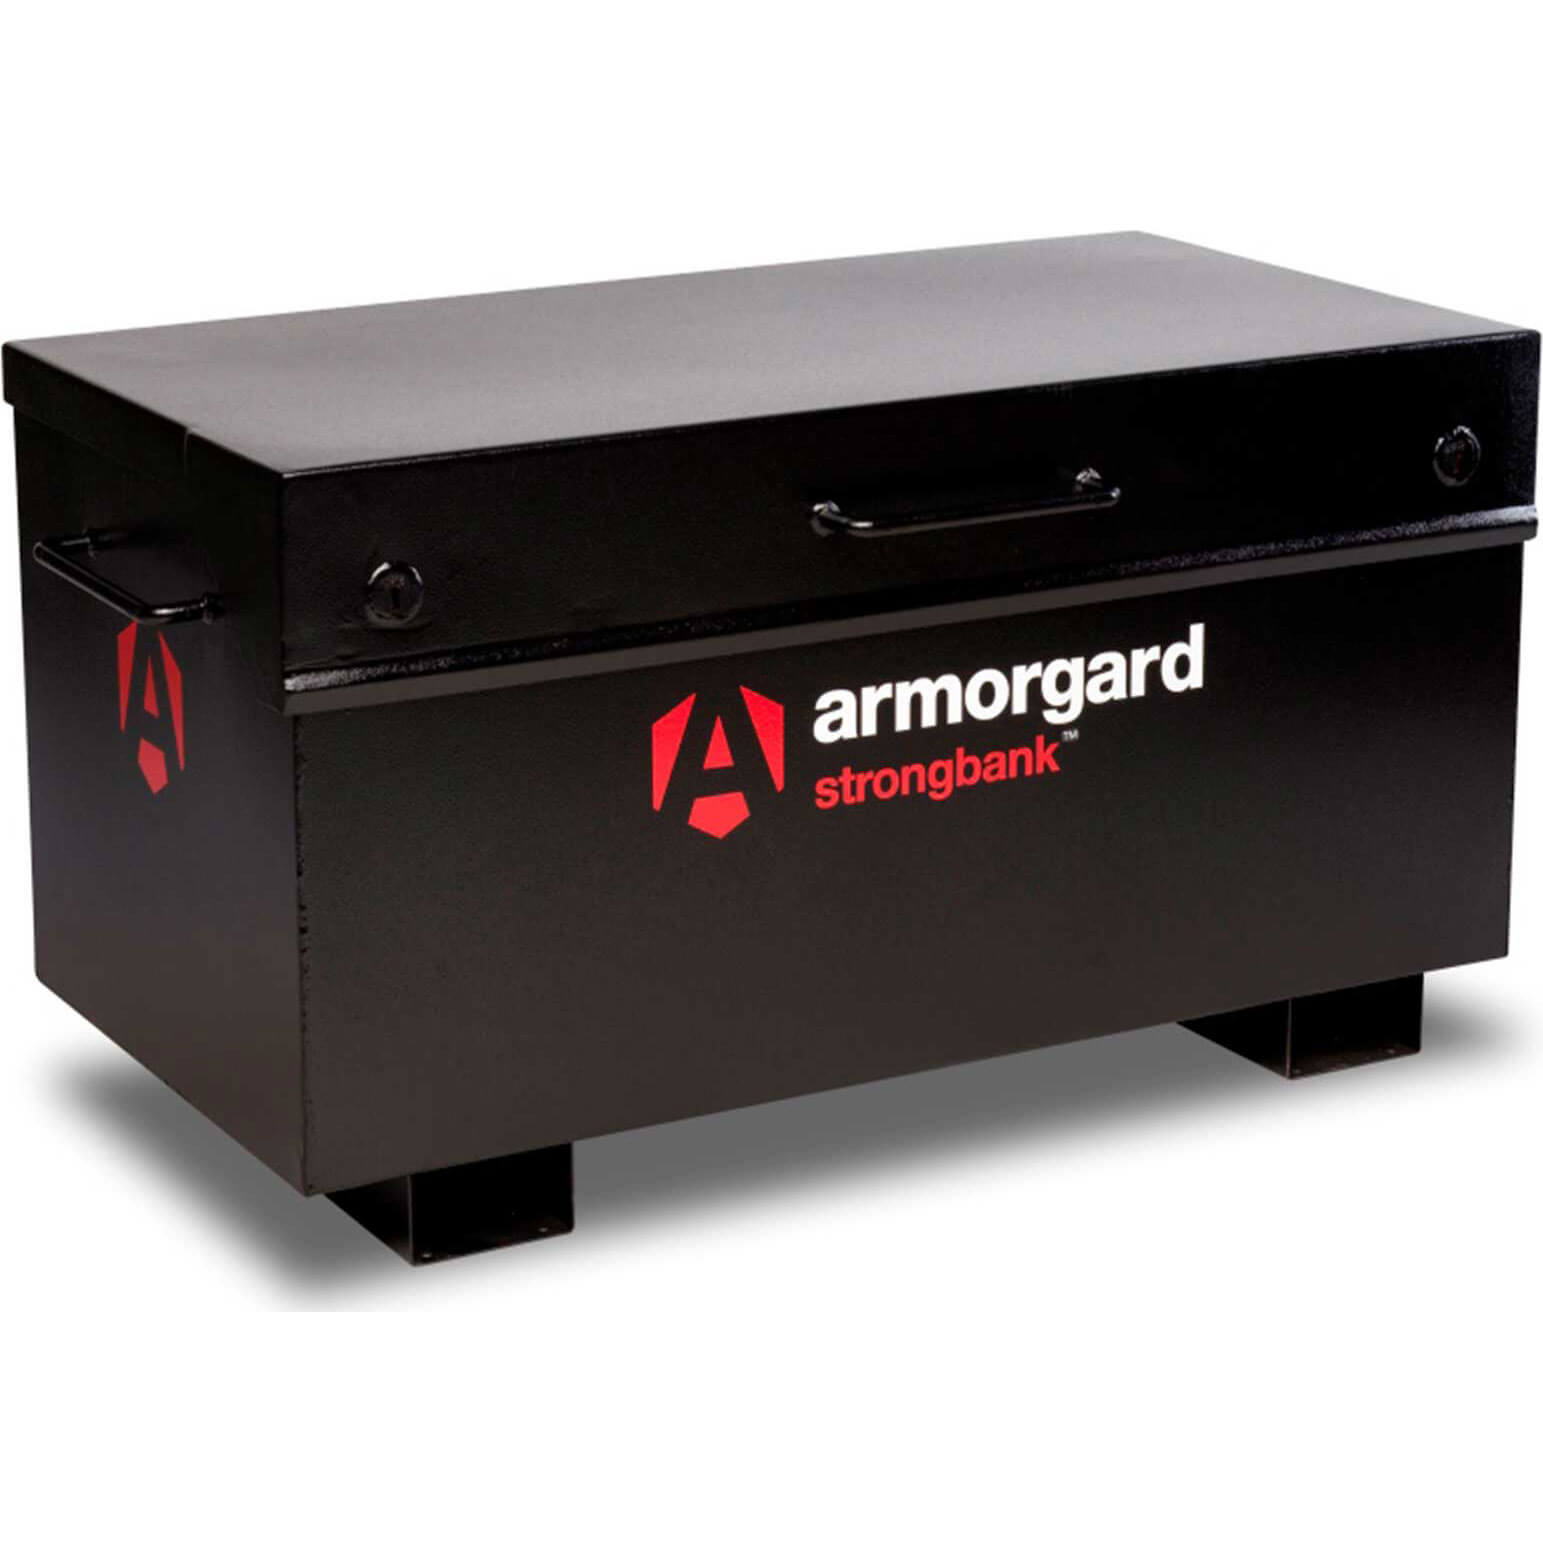 Image of Armorgard Strongbank Secure Site Storage Box 1310mm 690mm 665mm